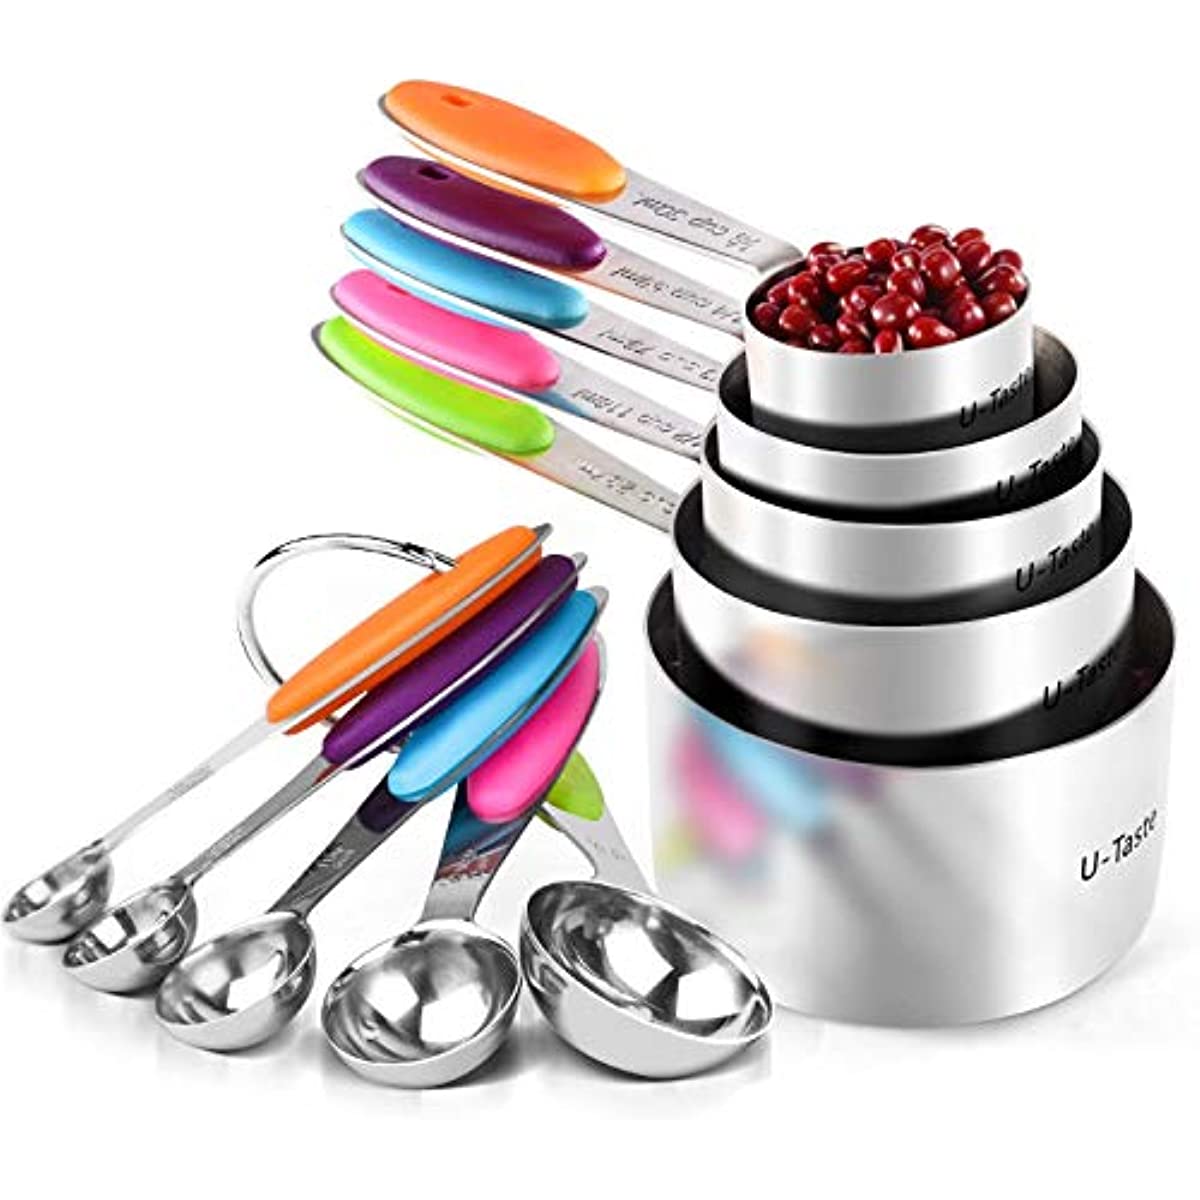 Measuring Cups And Measuring Spoons Set, Multifunctional Plasitc Measuring  Spoon With Stainless Steel Handle, Measuring Cup, Graduated Measuring Spoon  Set, Baking Tool For Cooking And Baking, Apartment Essentials, Back To  School Supplies 